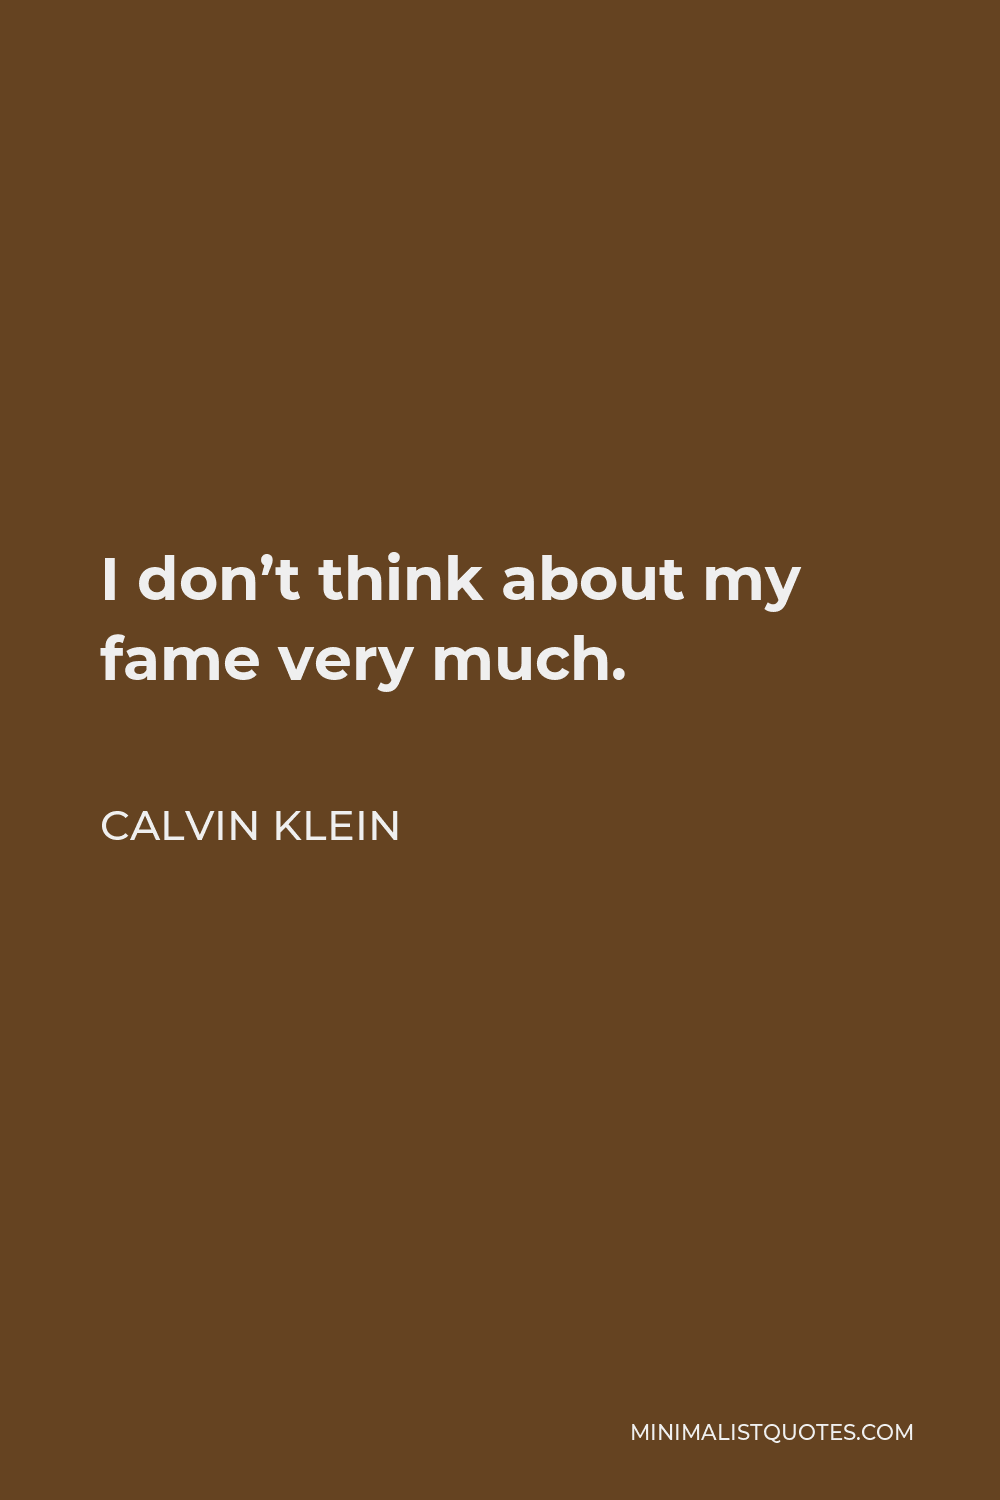 Calvin Klein Quote - I don’t think about my fame very much.